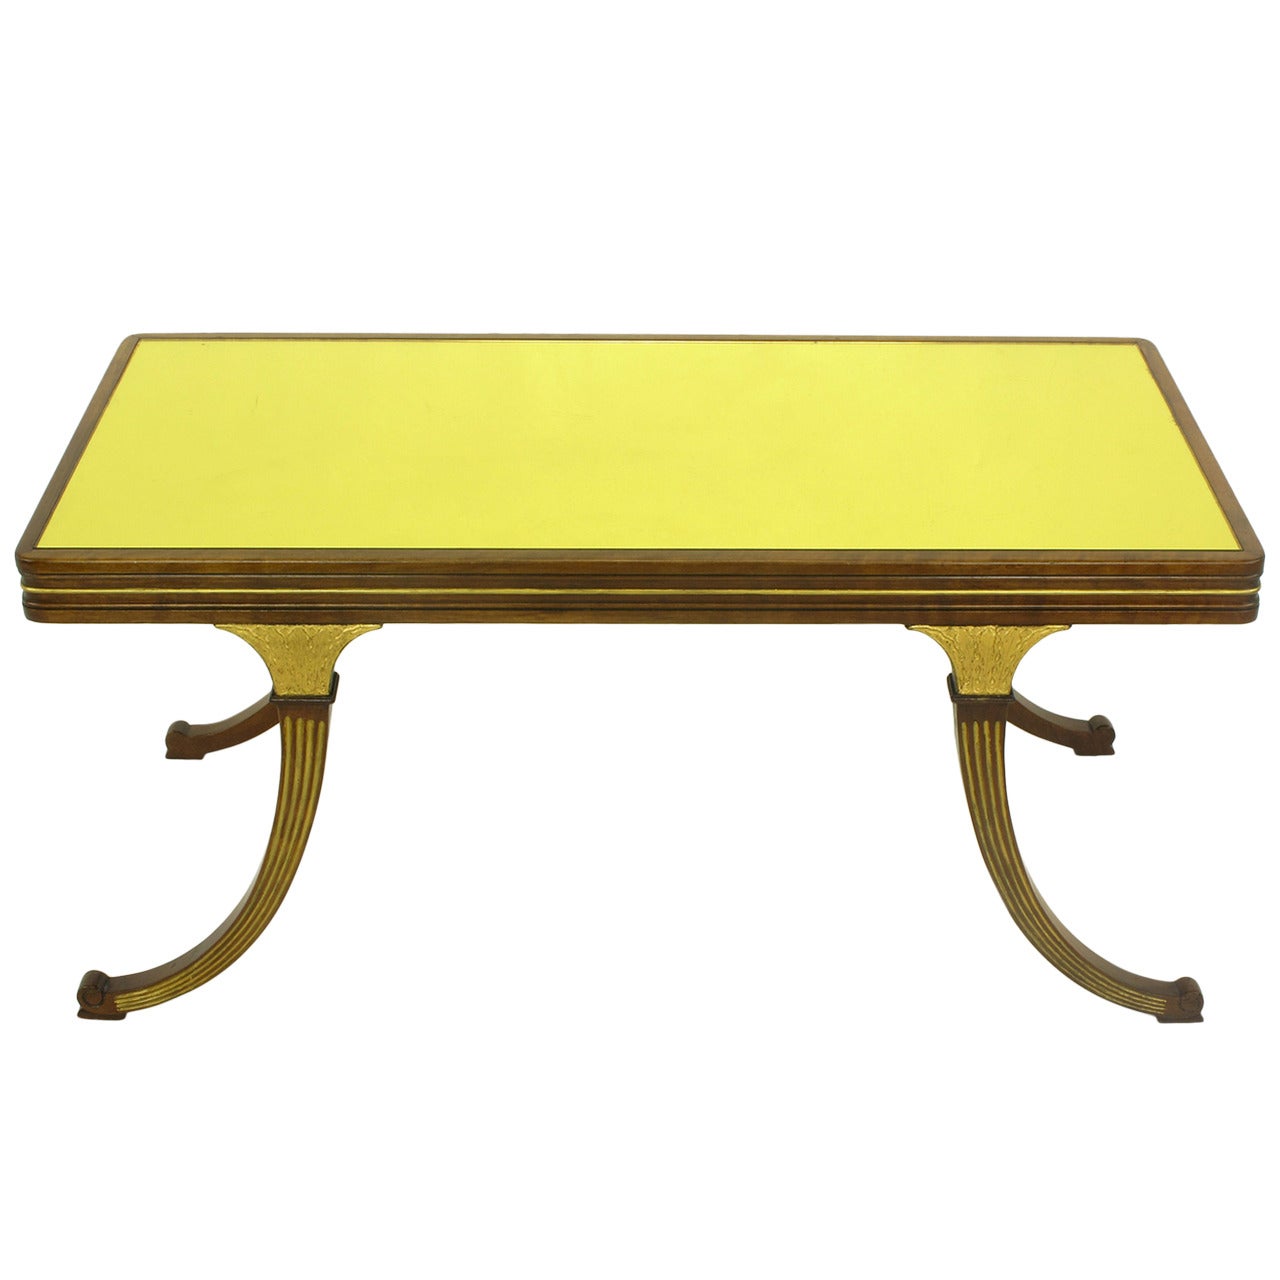 Early 1900s Parcel-Gilt and Walnut Empire Coffee Table with Gold Mirror Top For Sale